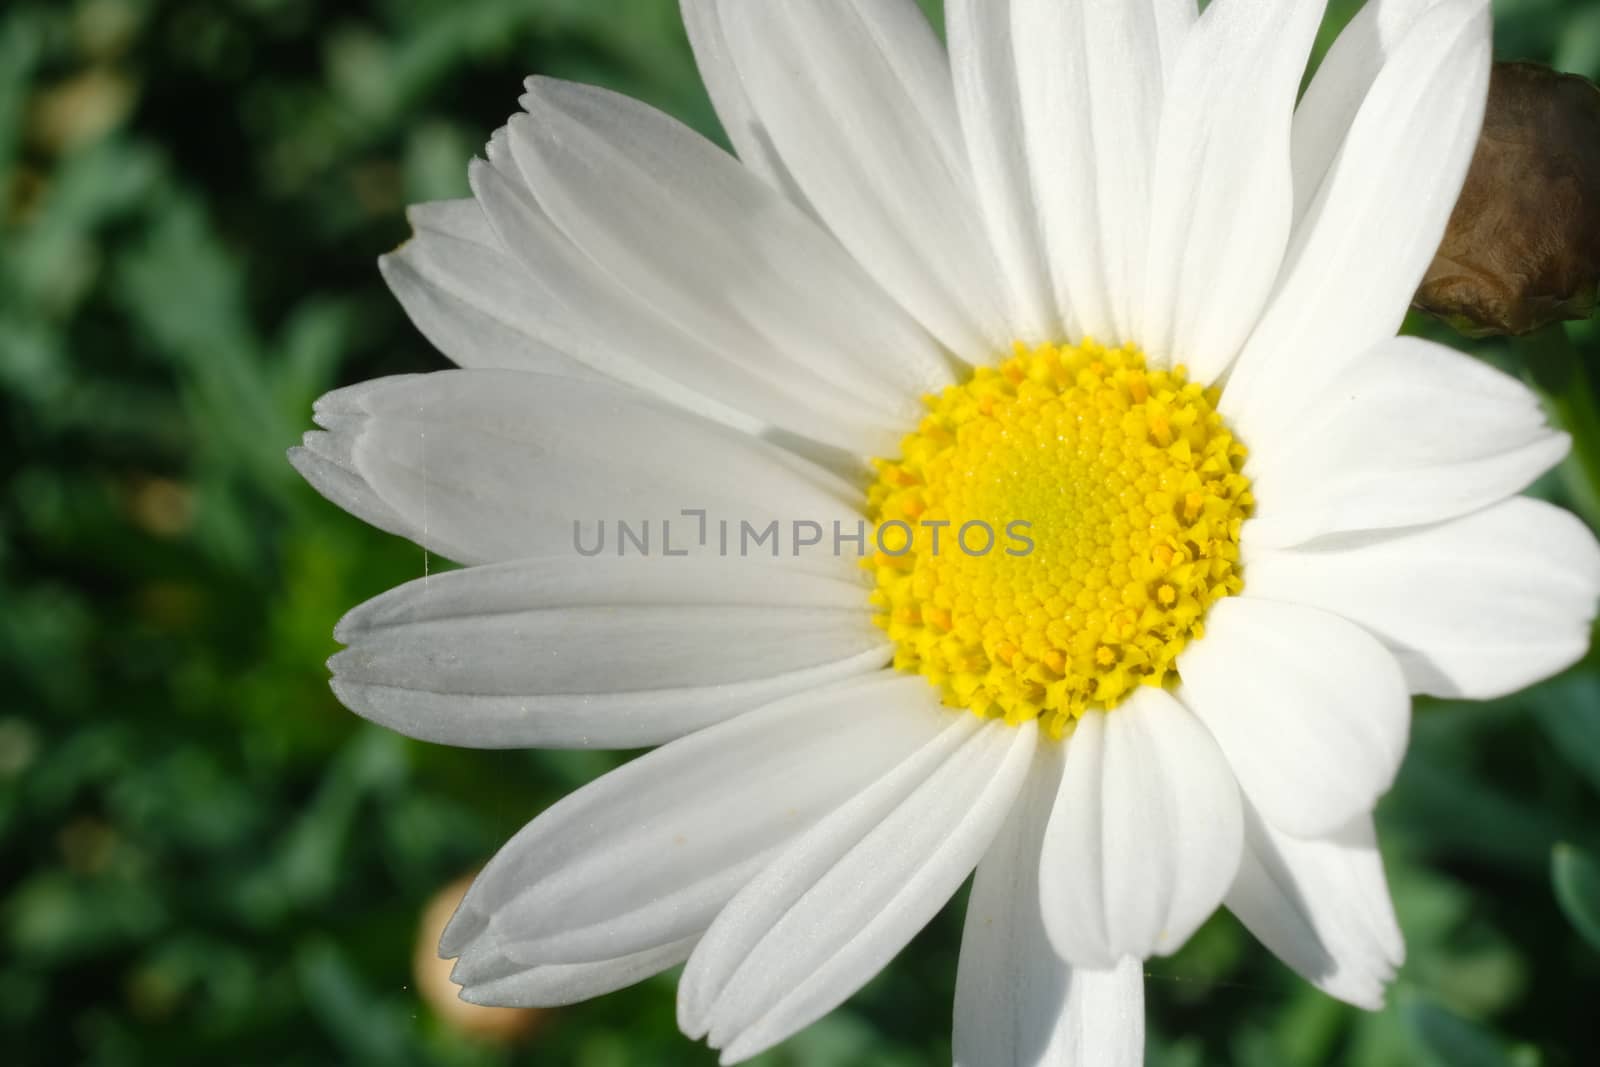 Large white and yellow daisy flower. Macro photography. White petals of a daisy.